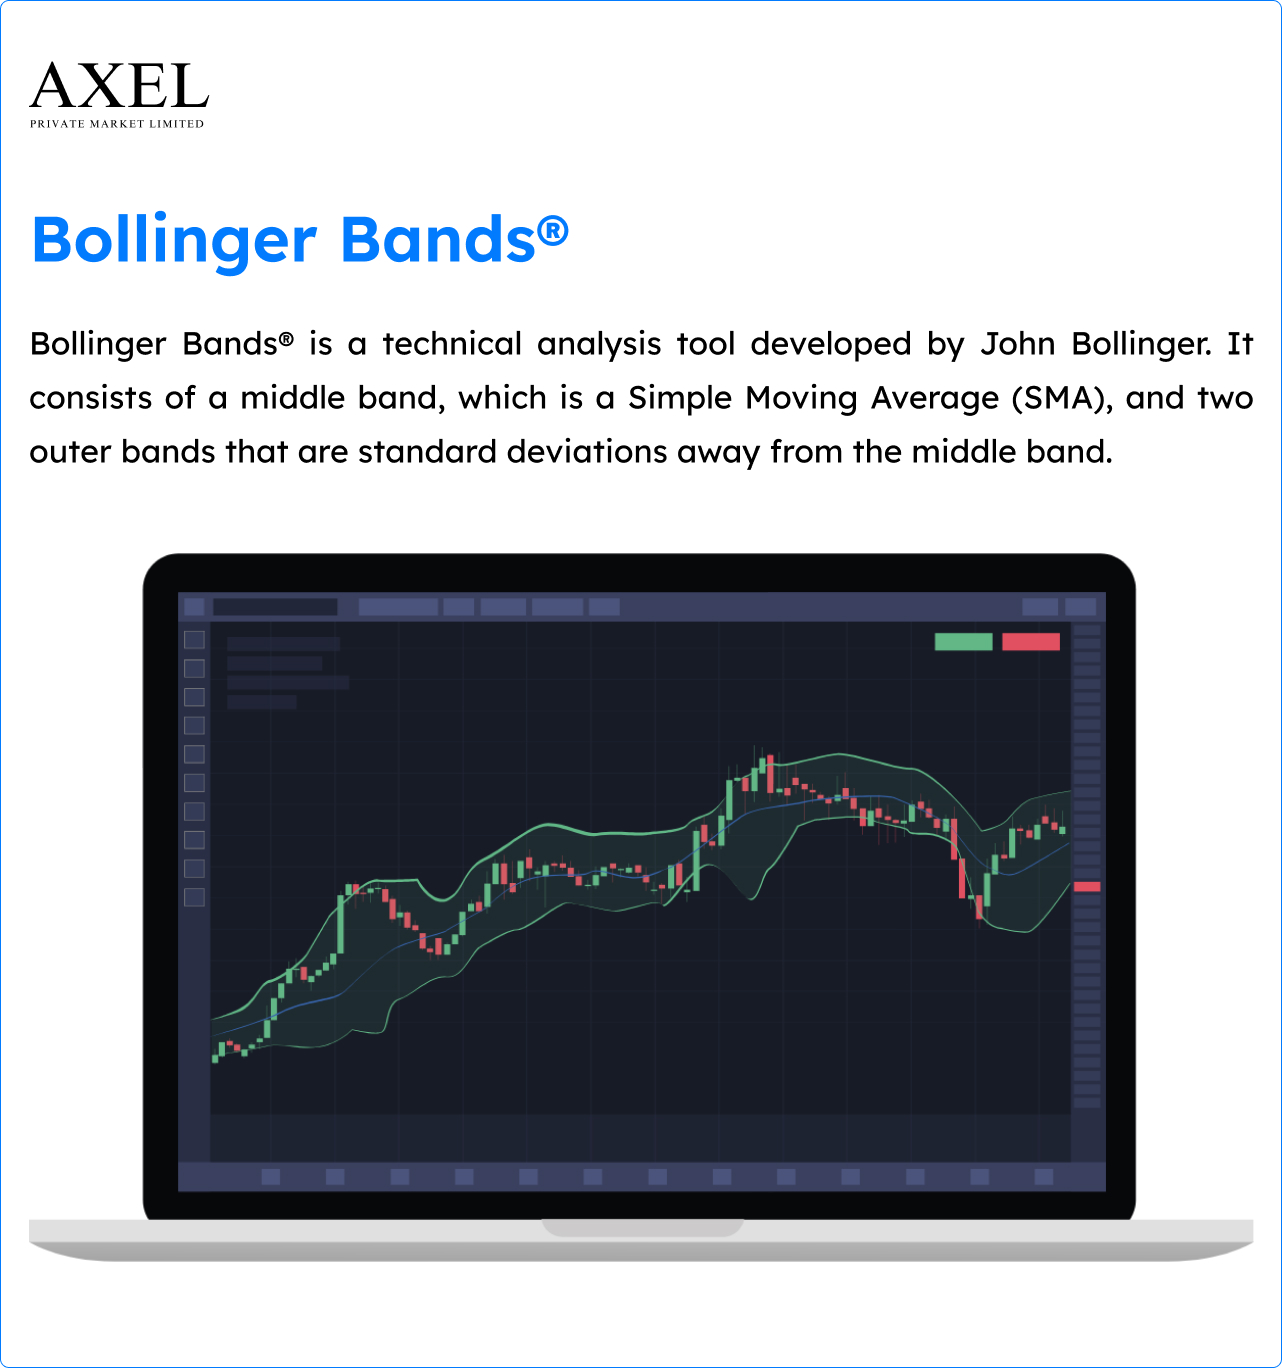 What is Bollinger Bands?